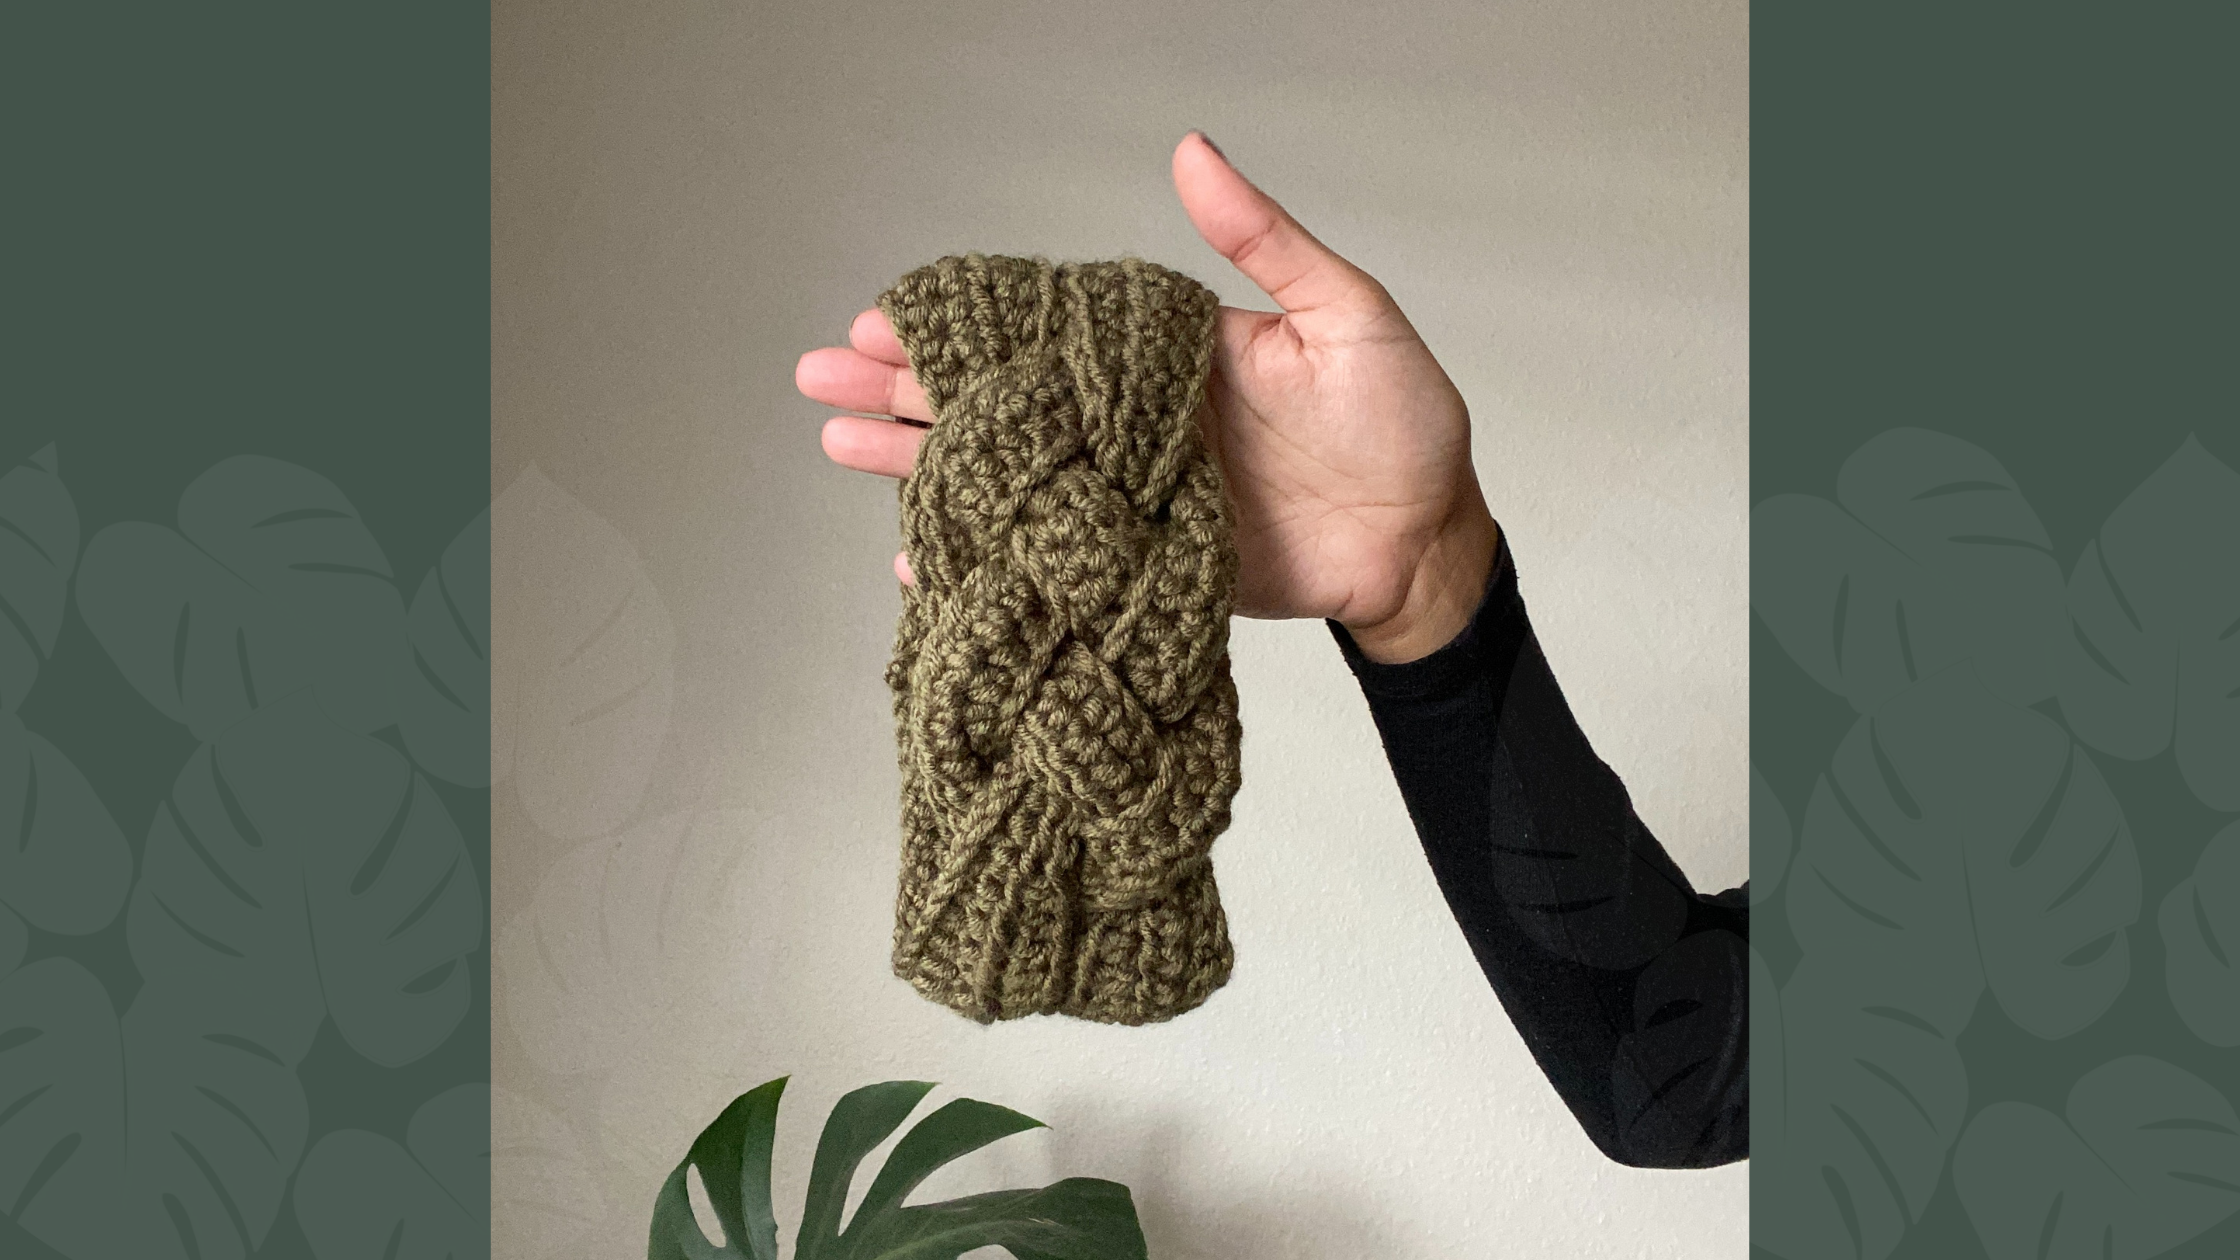 olive sailor's knot headband being held in front of houseplant